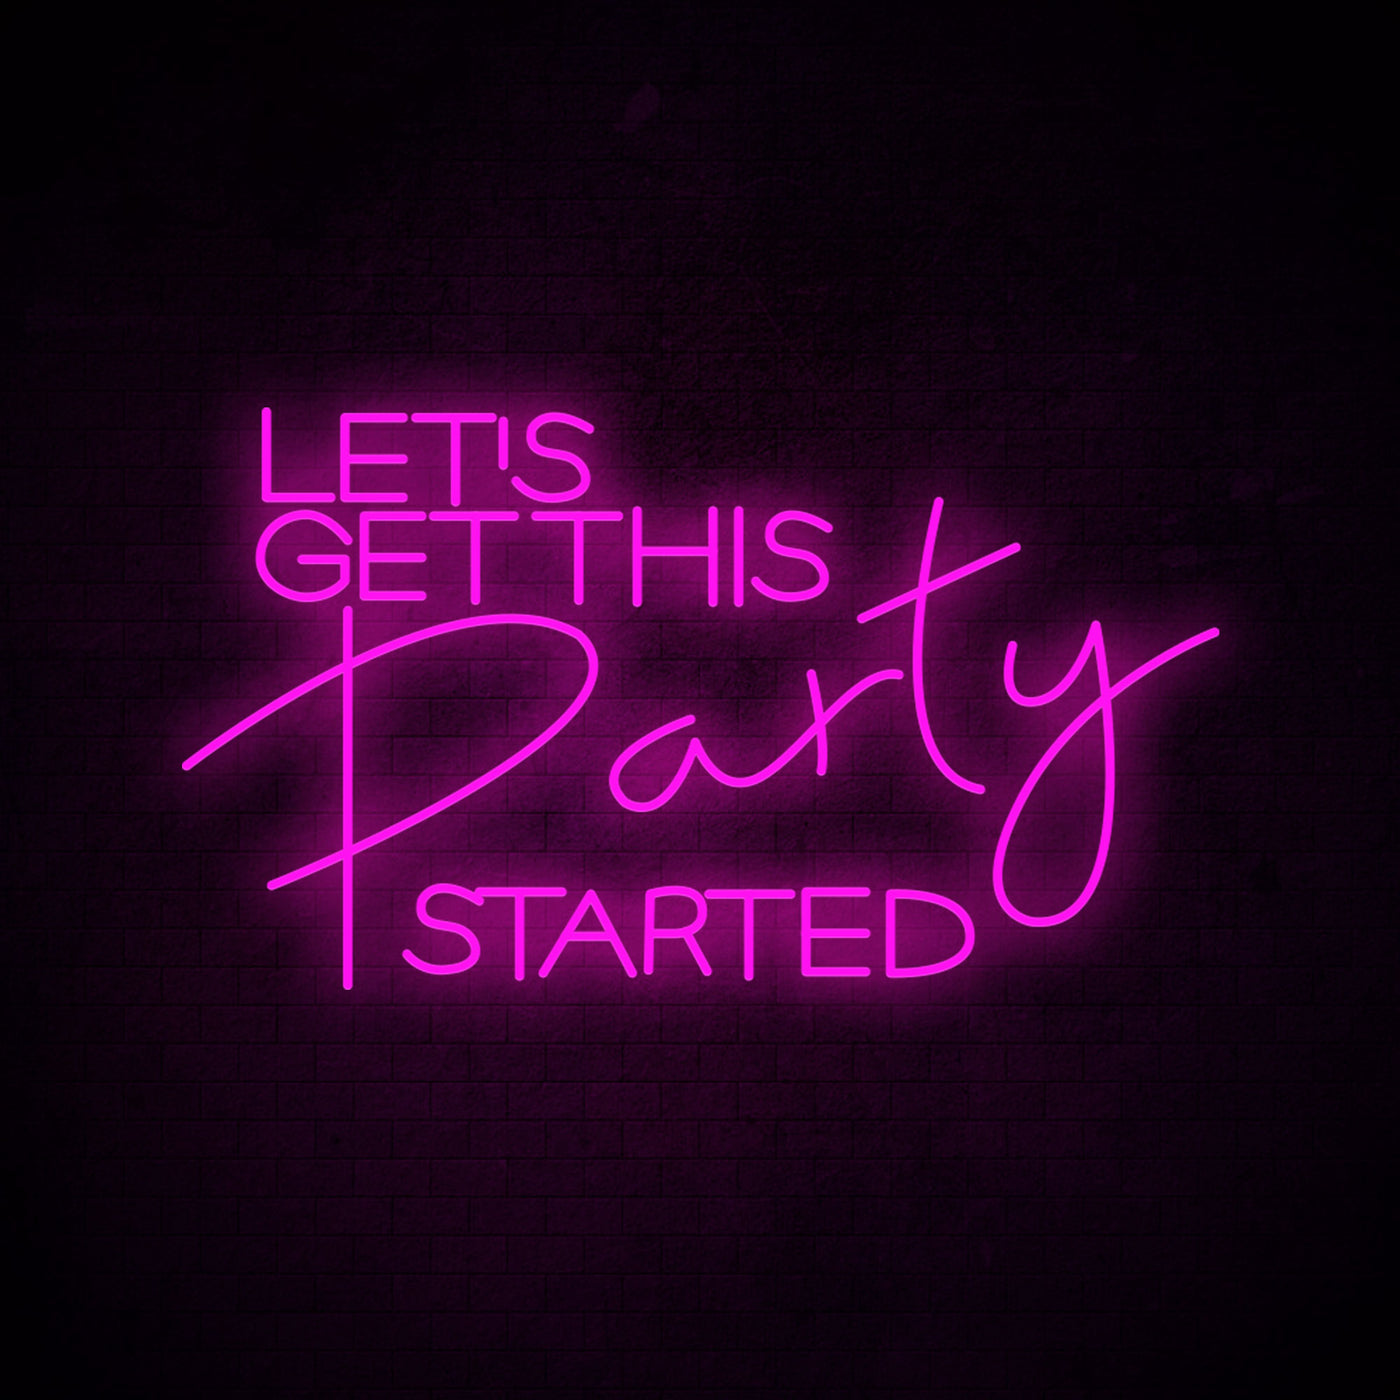 Let's Party Neon Sign Flex Let's Get This Party Started Led Neon Light Sign Led Text Custom Party Wedding Led Neon Sign Home Room Decoration